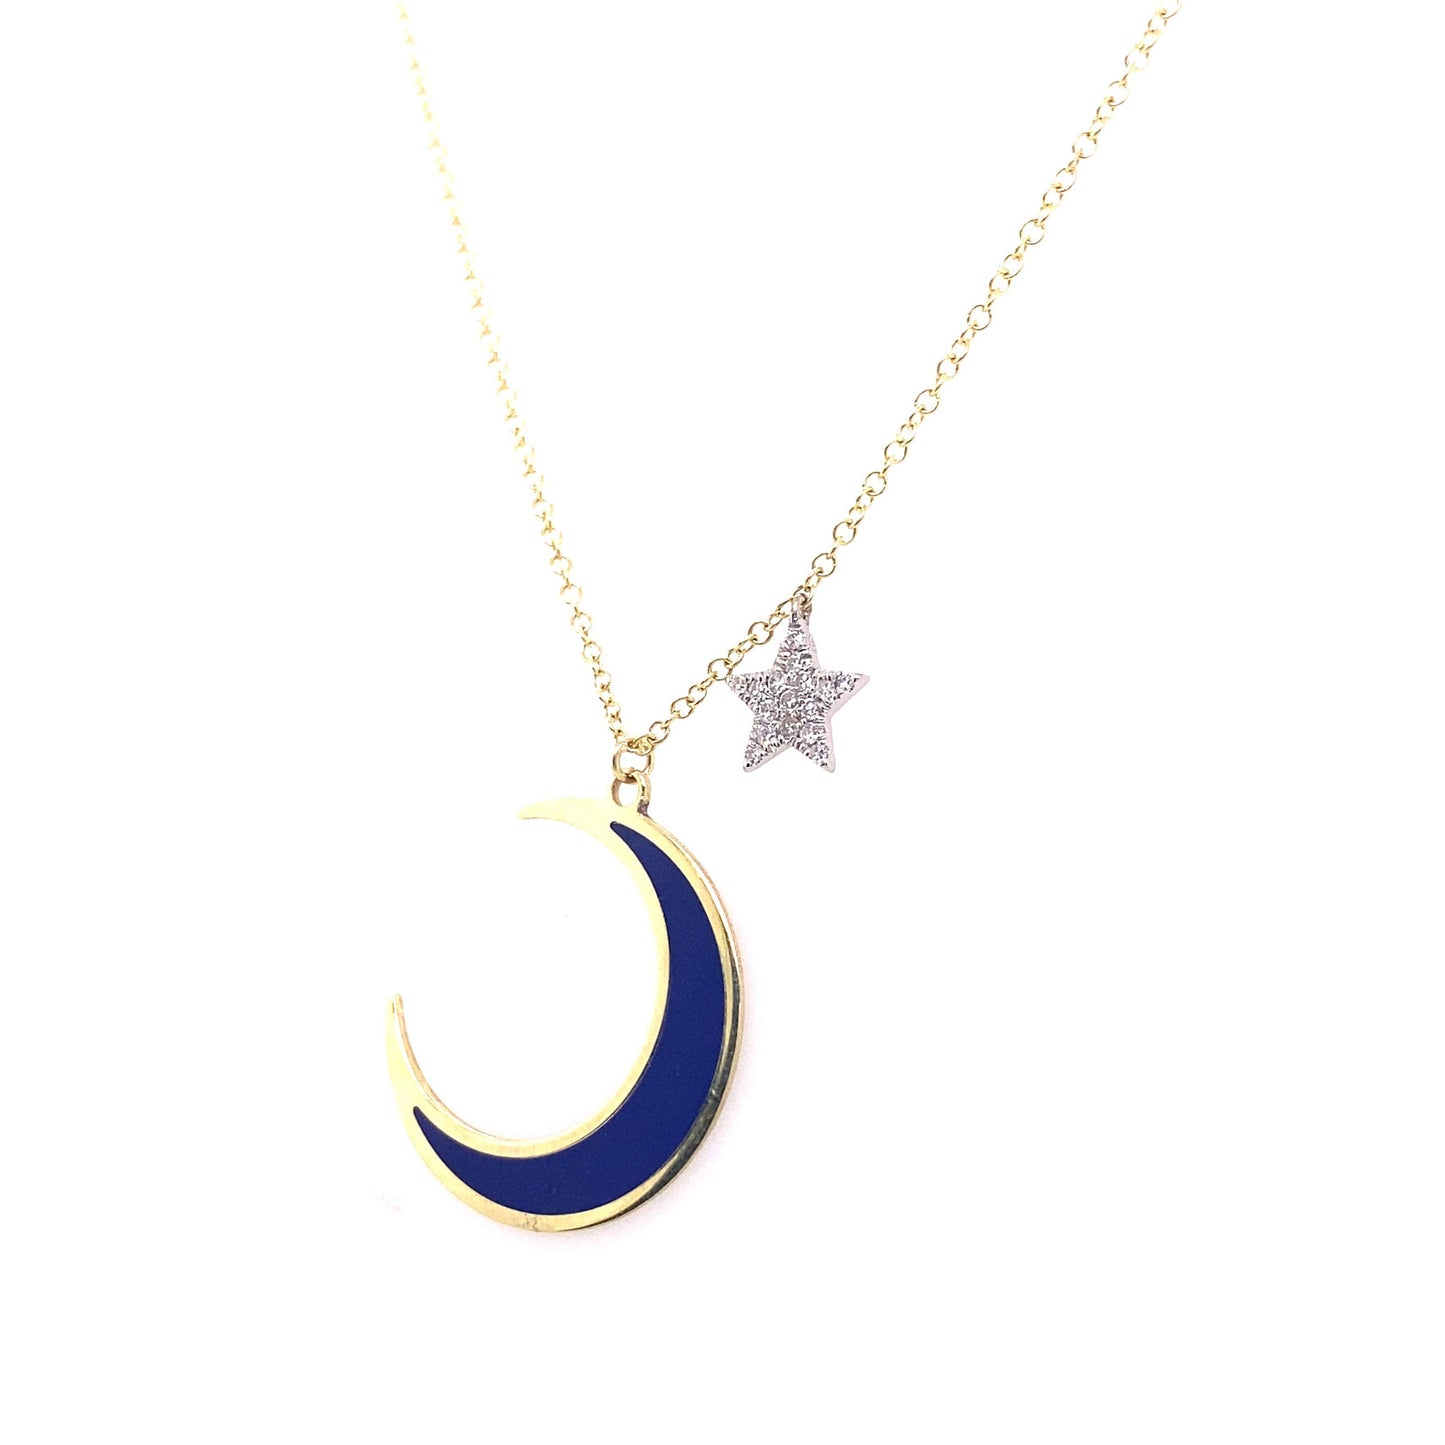 Meira T 14kt Yellow Gold Blue Enamel Moon and Star Diamond Charm Necklace